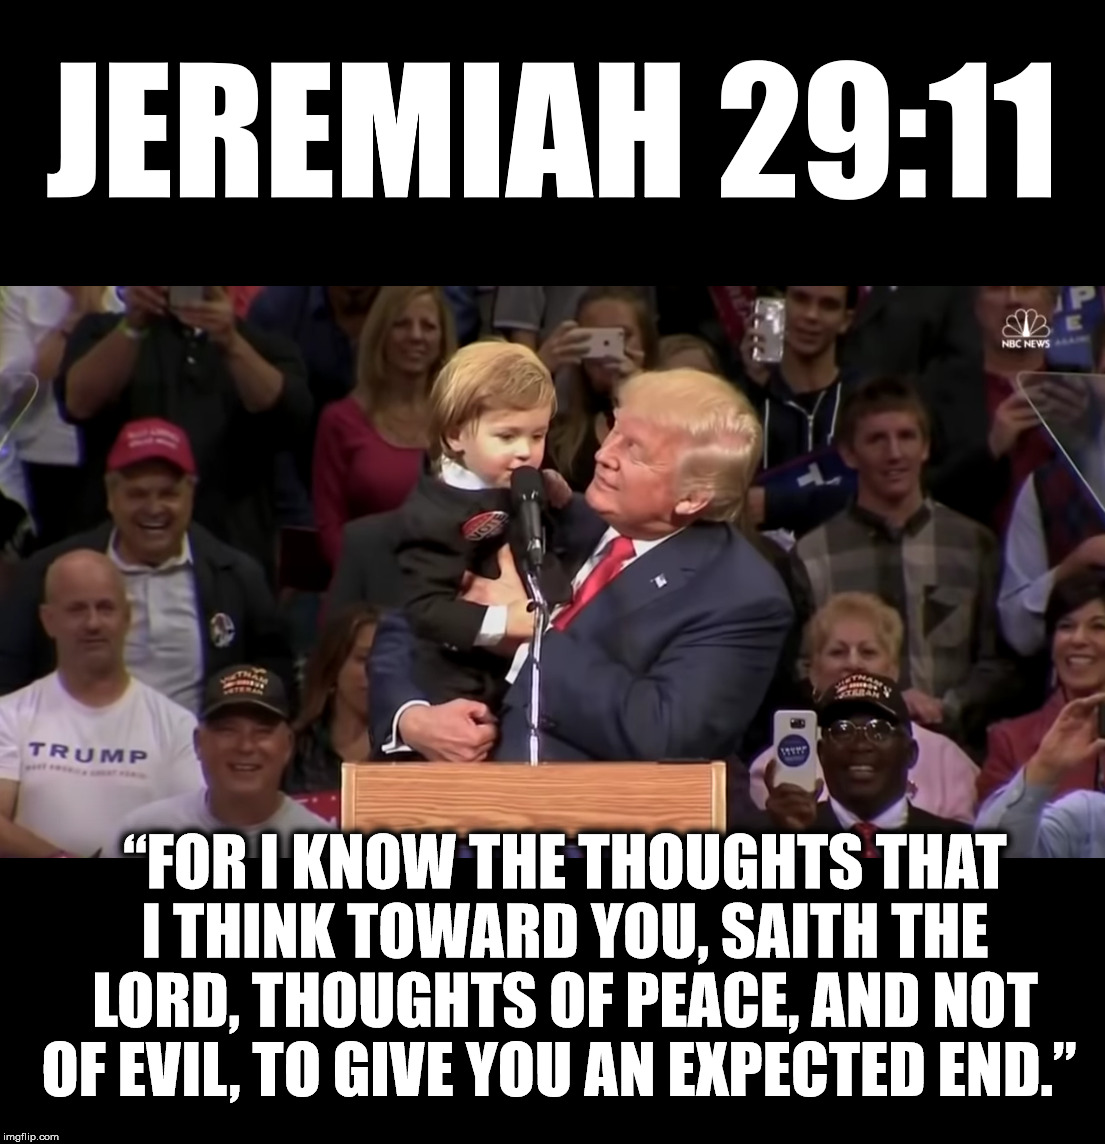 JEREMIAH 29:11; “FOR I KNOW THE THOUGHTS THAT I THINK TOWARD YOU, SAITH THE LORD, THOUGHTS OF PEACE, AND NOT OF EVIL, TO GIVE YOU AN EXPECTED END.” | made w/ Imgflip meme maker